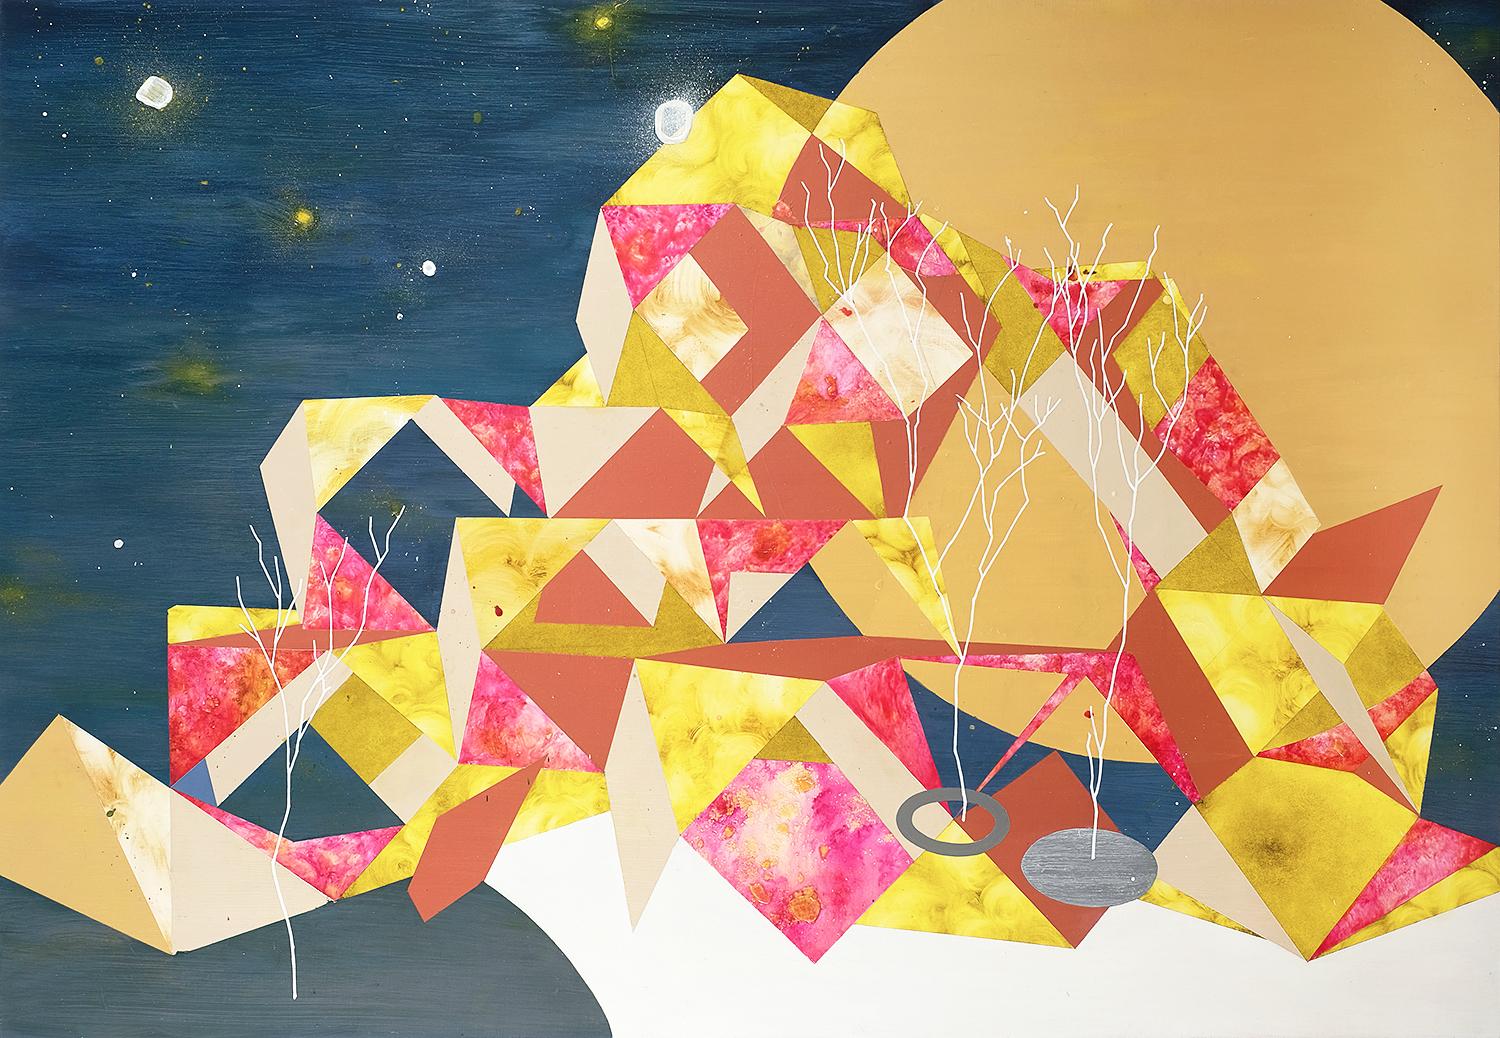 Mira Song Abstract Painting - Moon Viewing Platform_ Cuboctahedron, Contemporary, Abstract, Geometric, Artwork